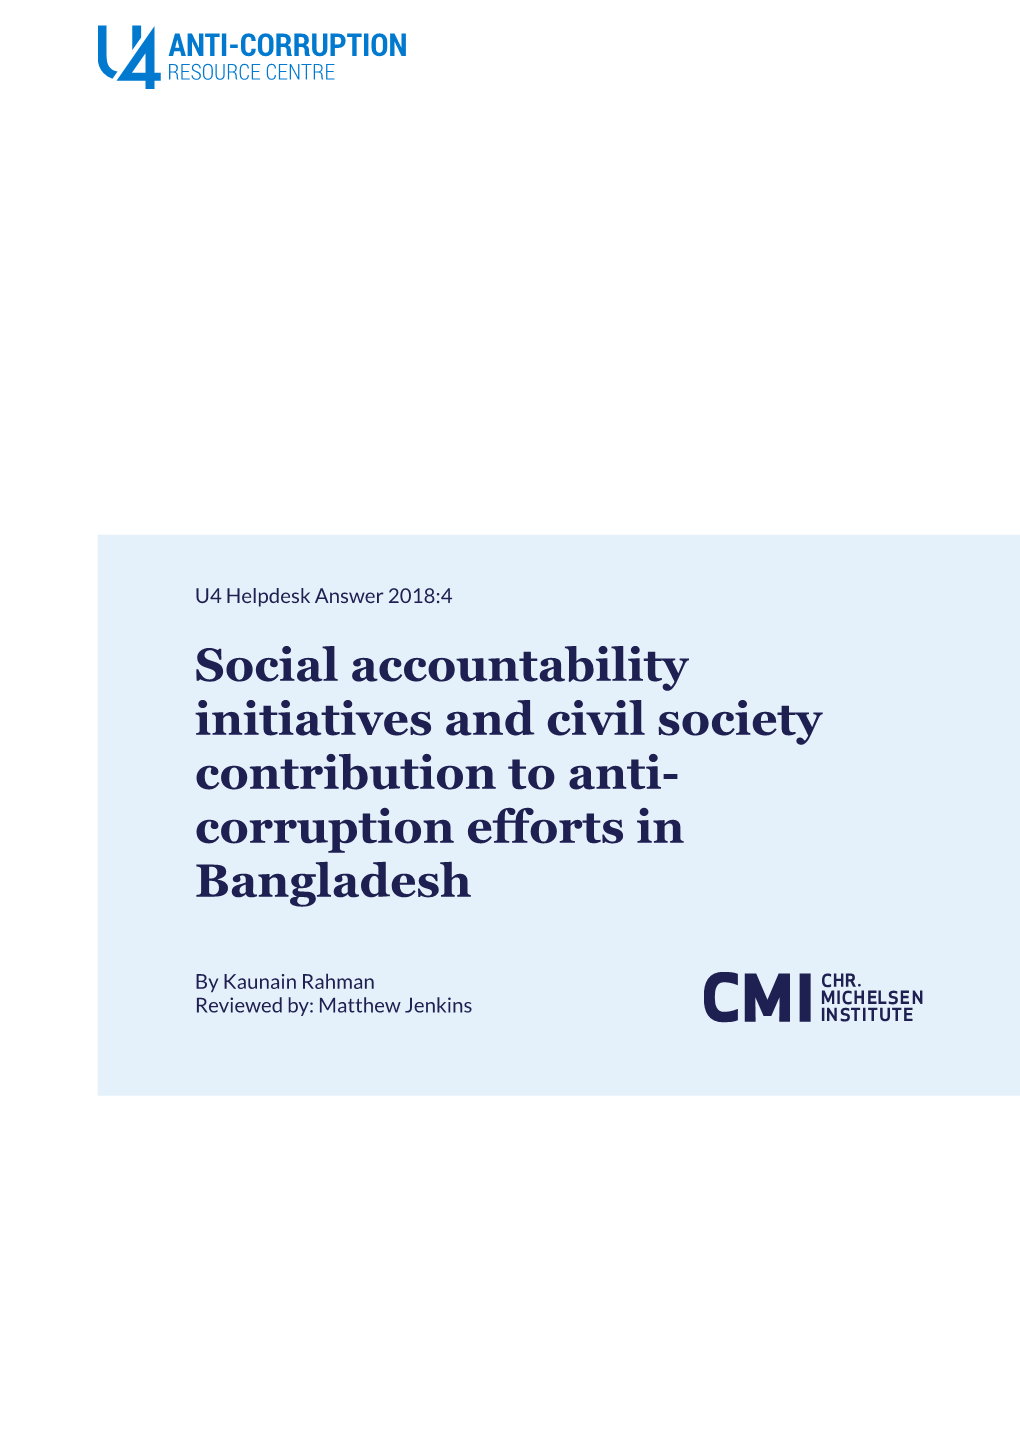 Social Accountability Initiatives and Civil Society Contribution to Anti- Corruption Efforts in Bangladesh